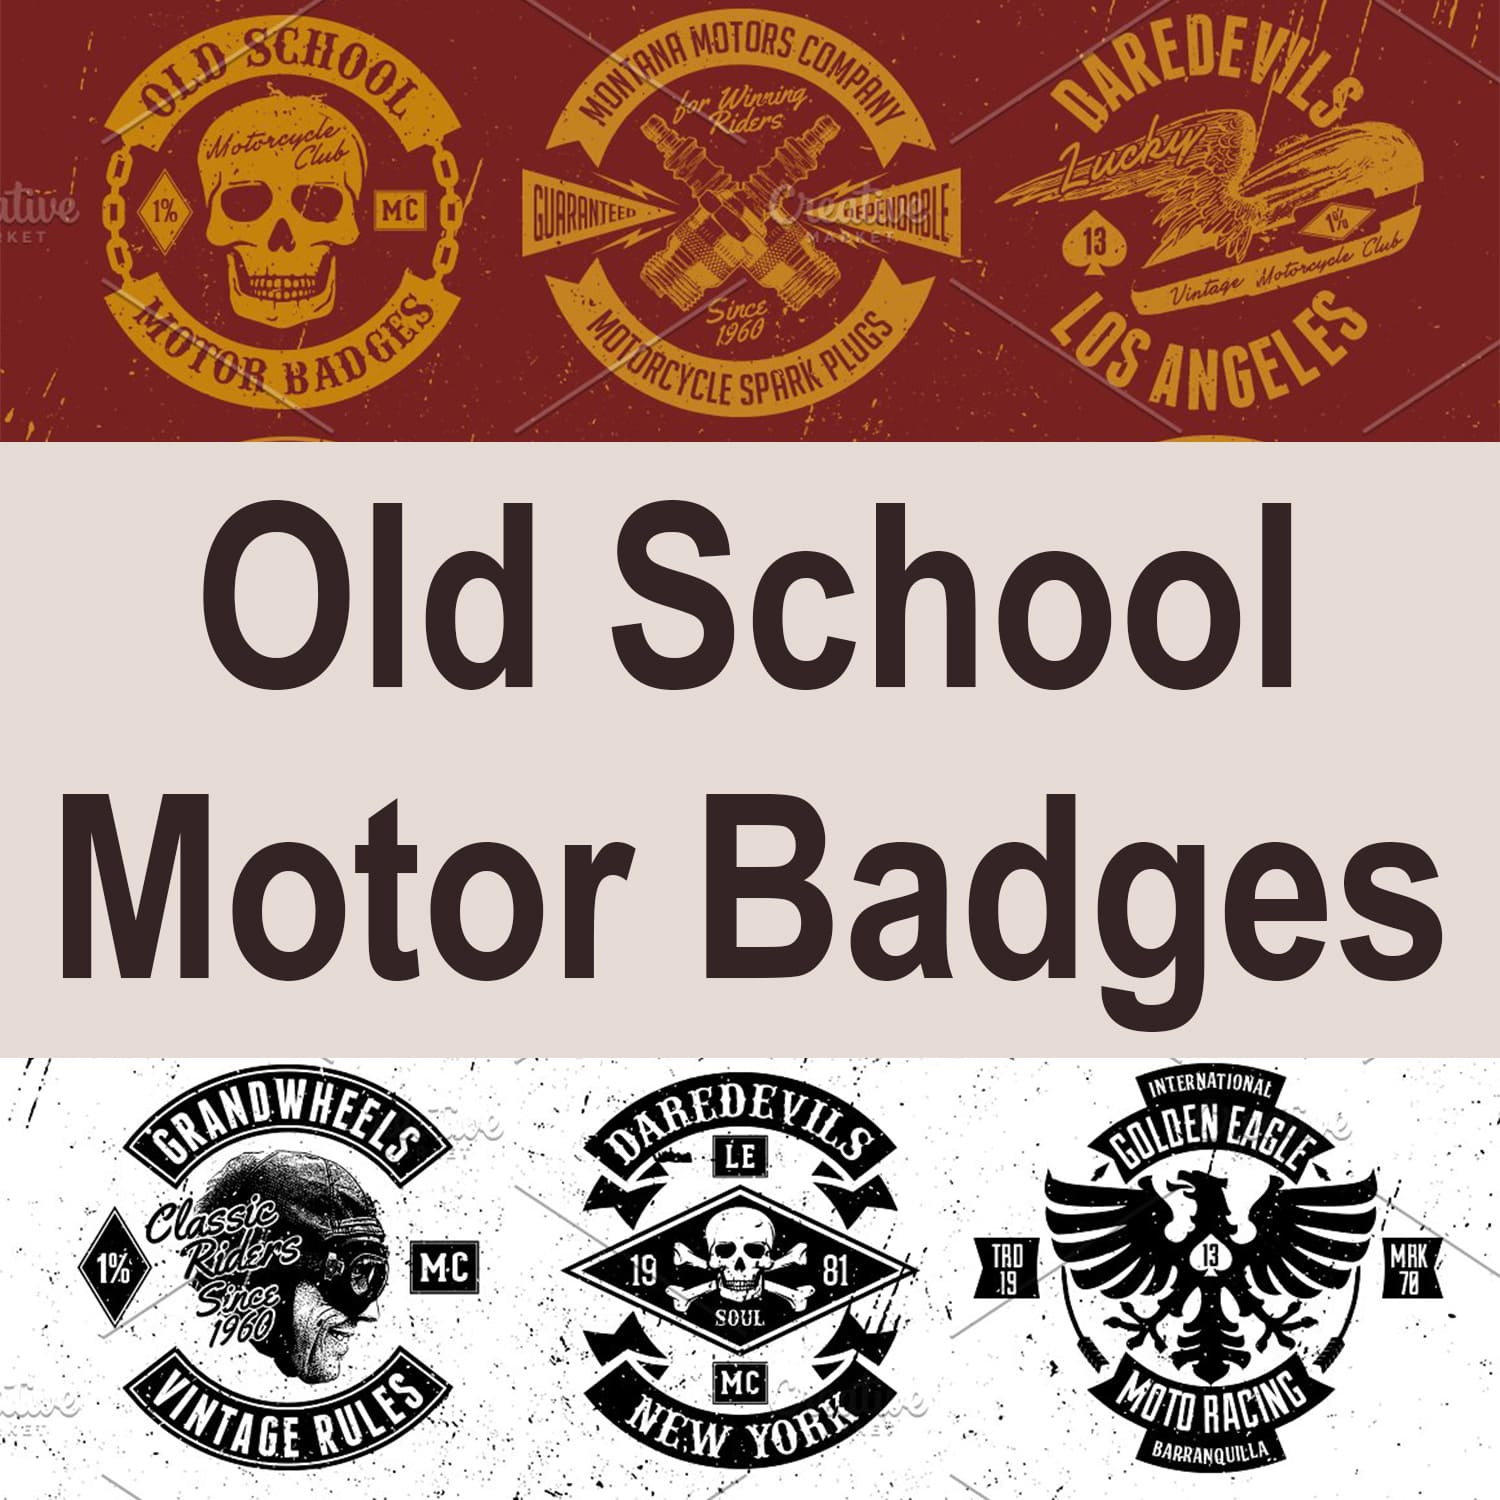 Old School Motor Badges main cover.